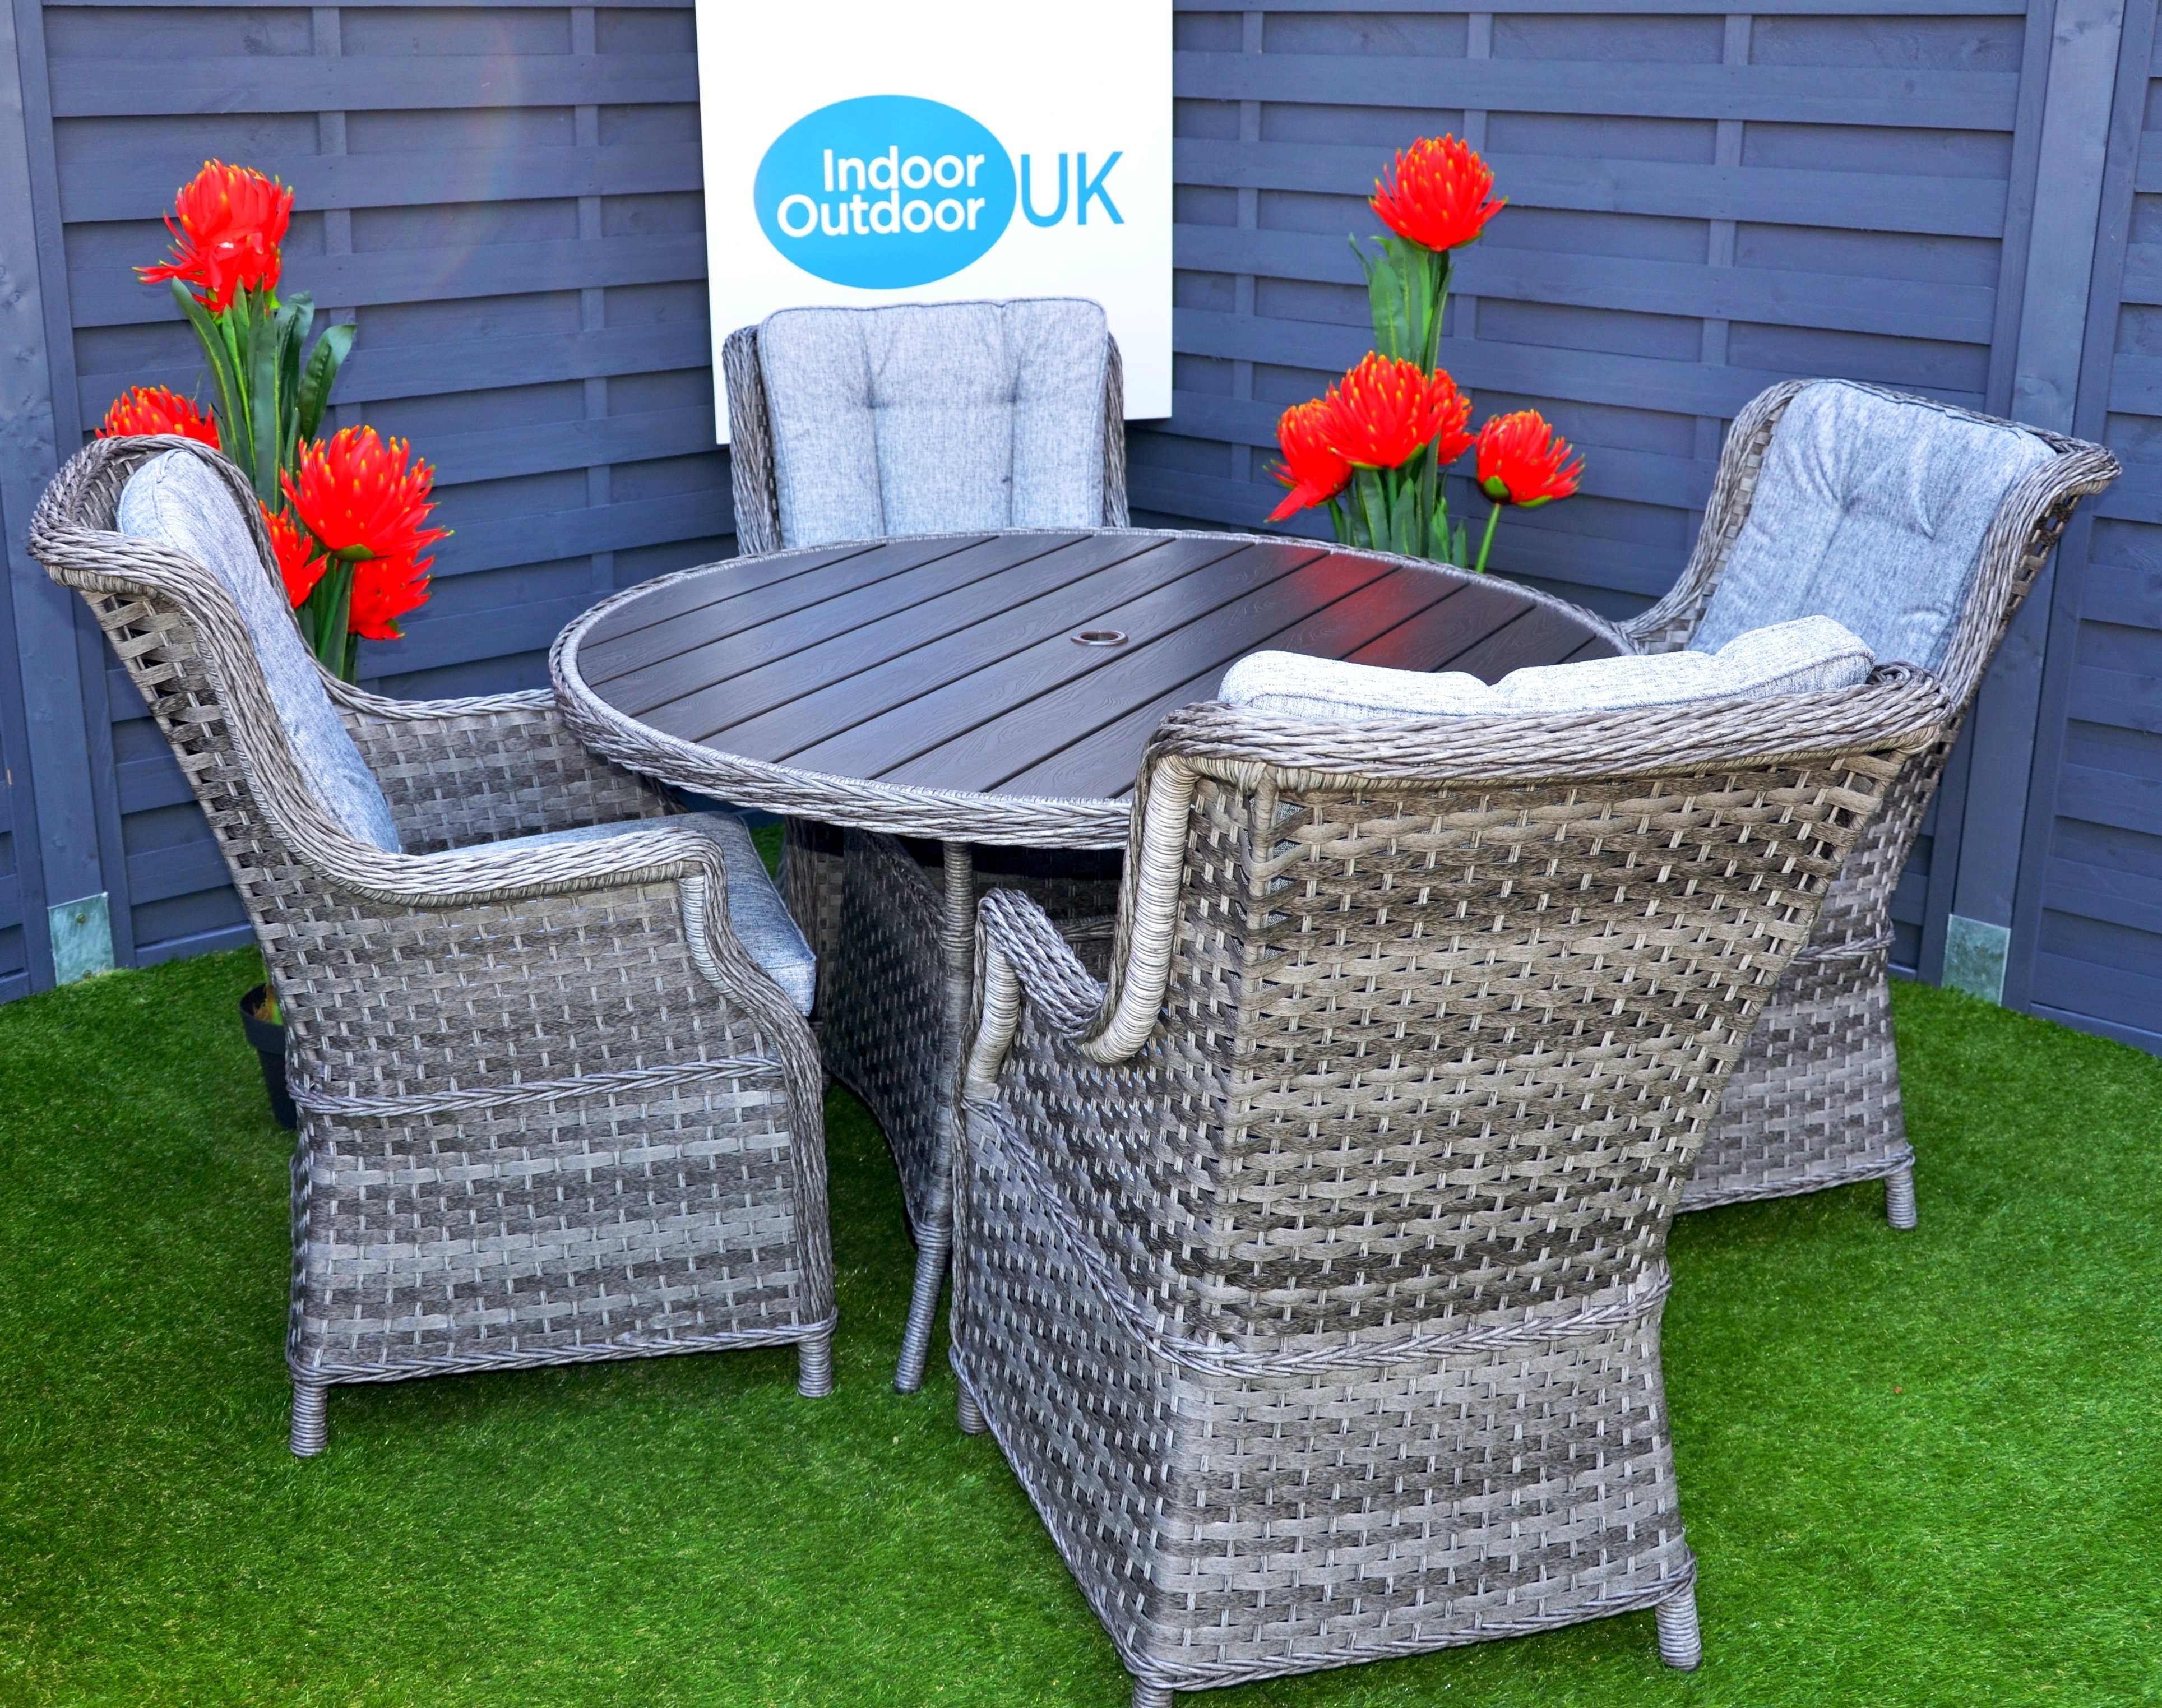 Hatherton 4 or 6 Seater Rattan Dining Set With Polywood Top- In Grey or Natural AVAILABILITY 15th JULY – 4 seater dining set grey JULY AVAILABILITY